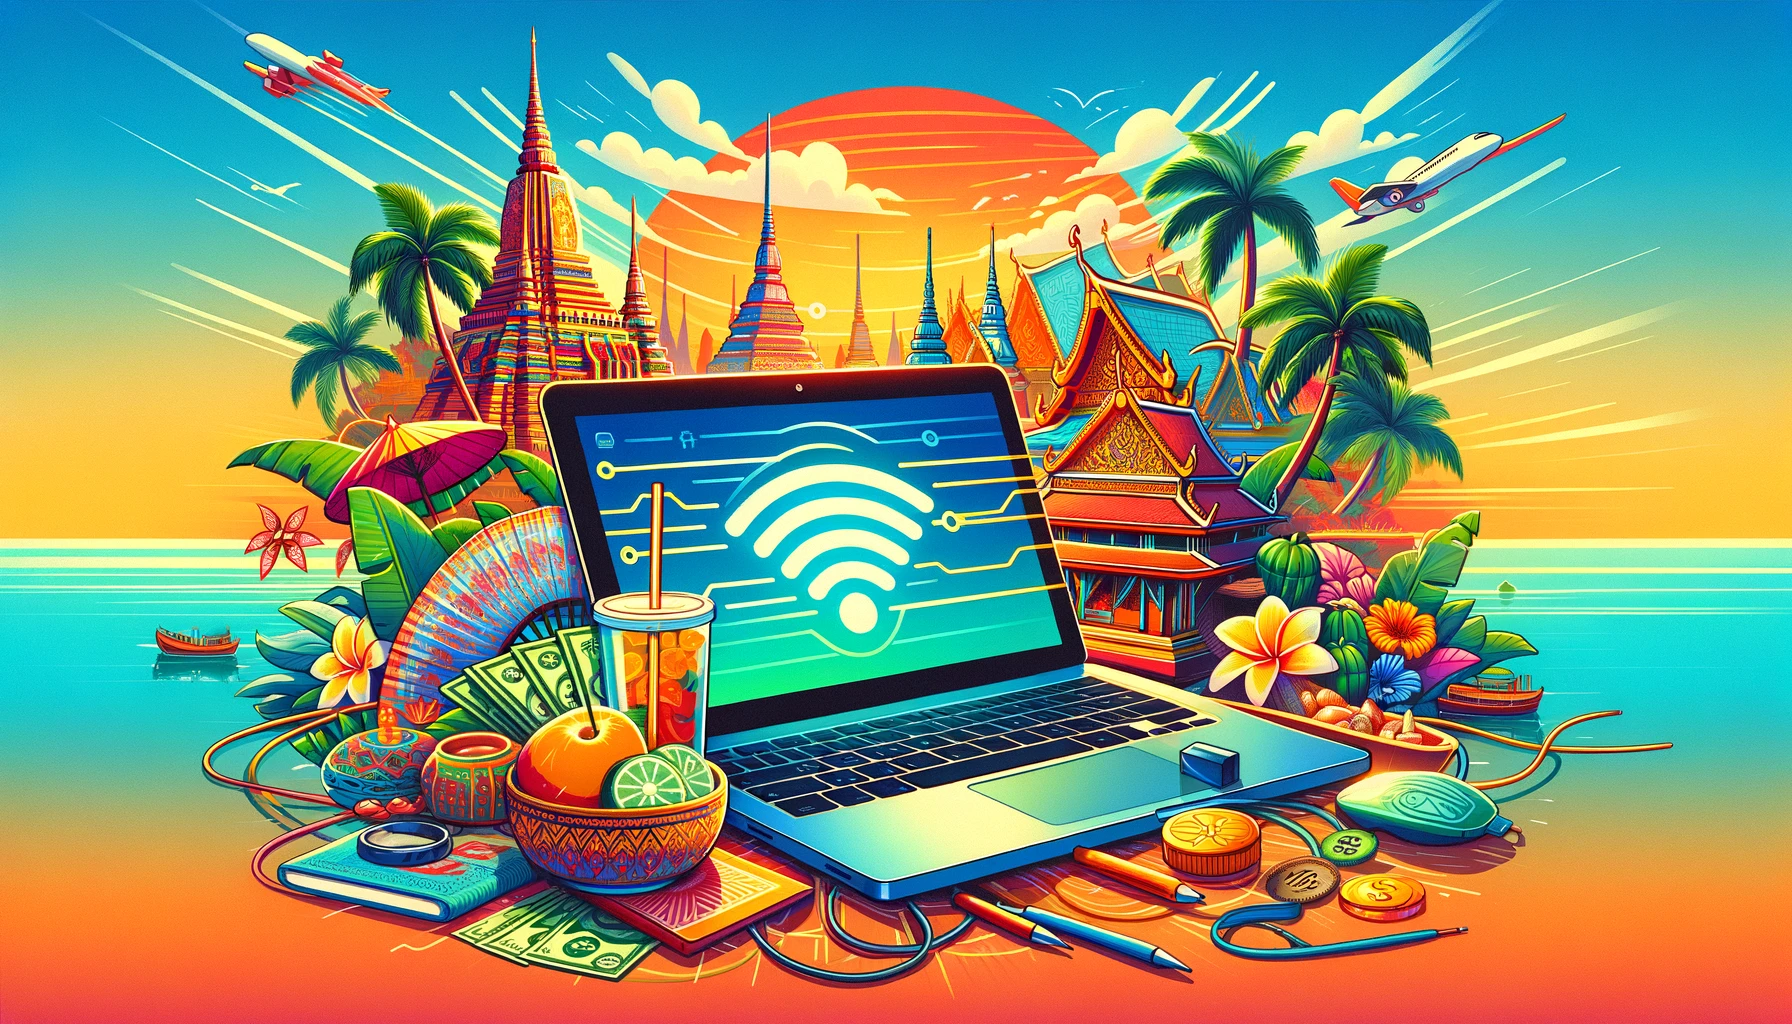 Thailand: A Remote Work Paradise with Blazing-Fast Internet Speeds